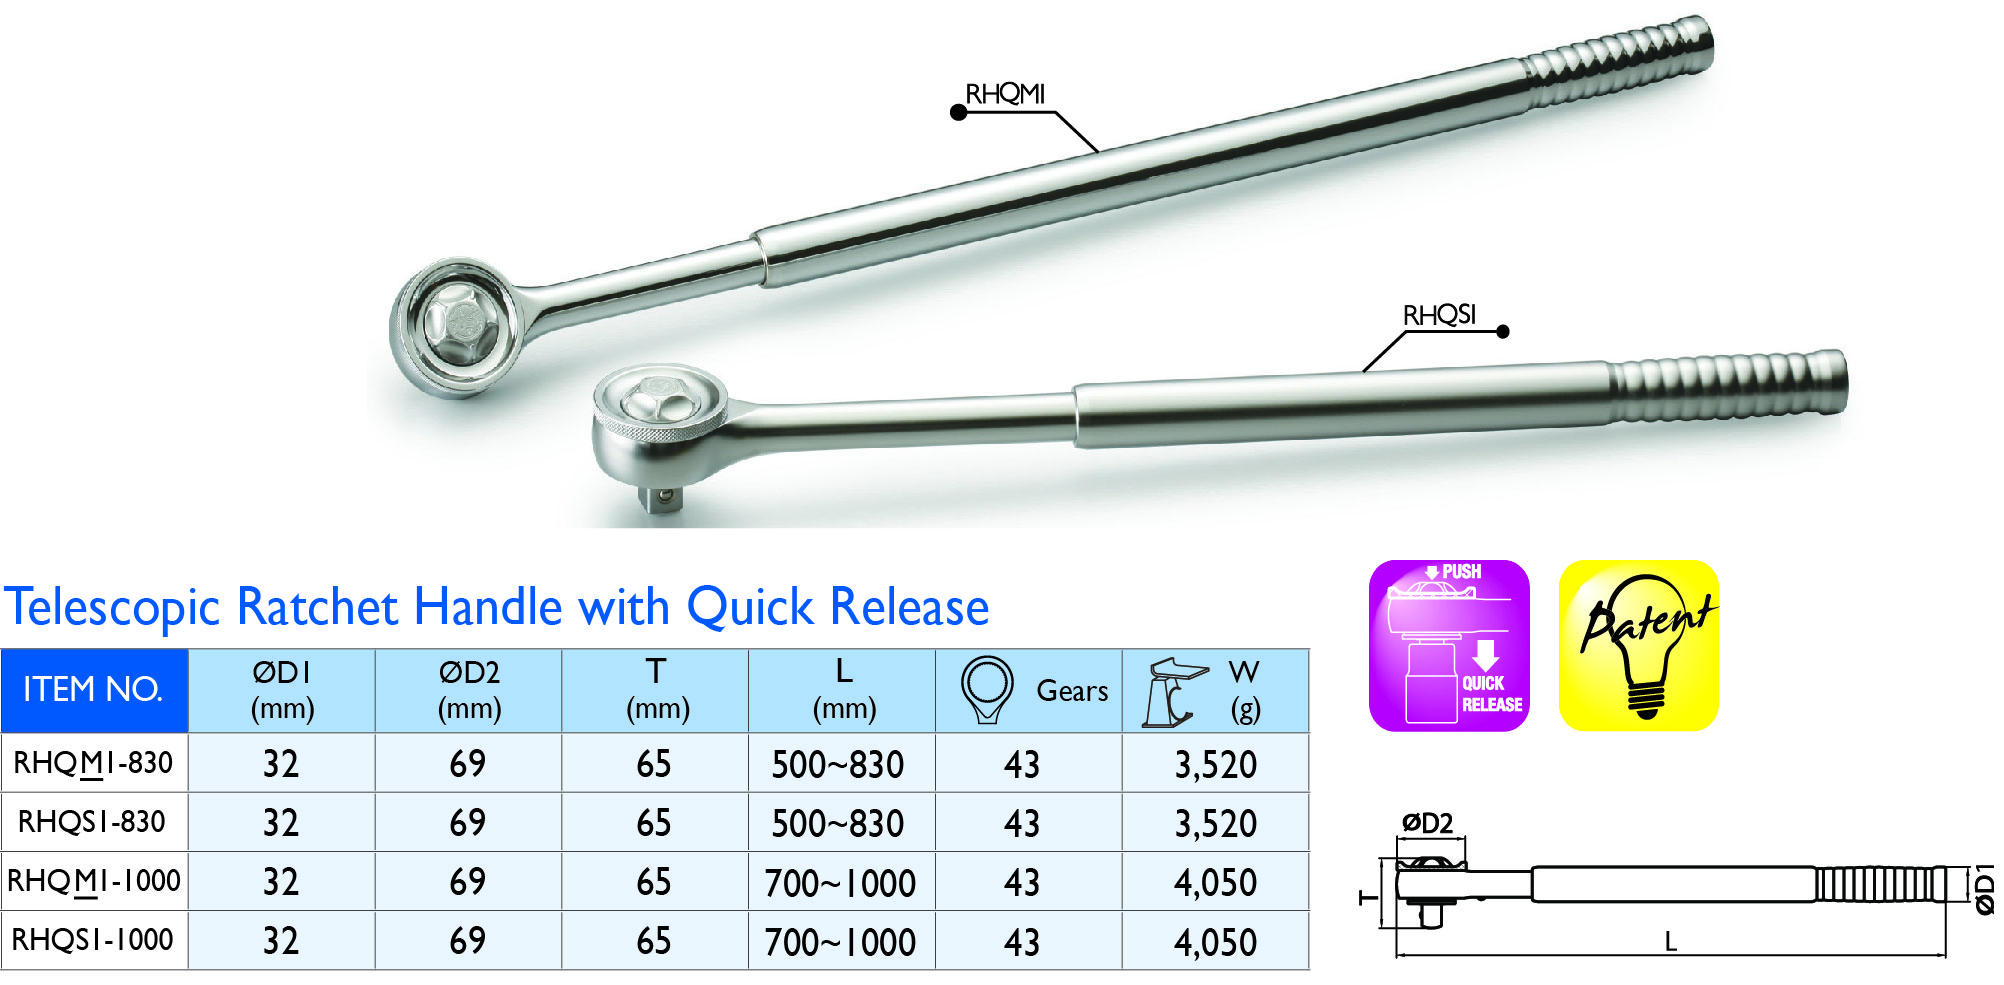 8_11 Telescopic Ratchet Handle with Quick Release_A.jpg